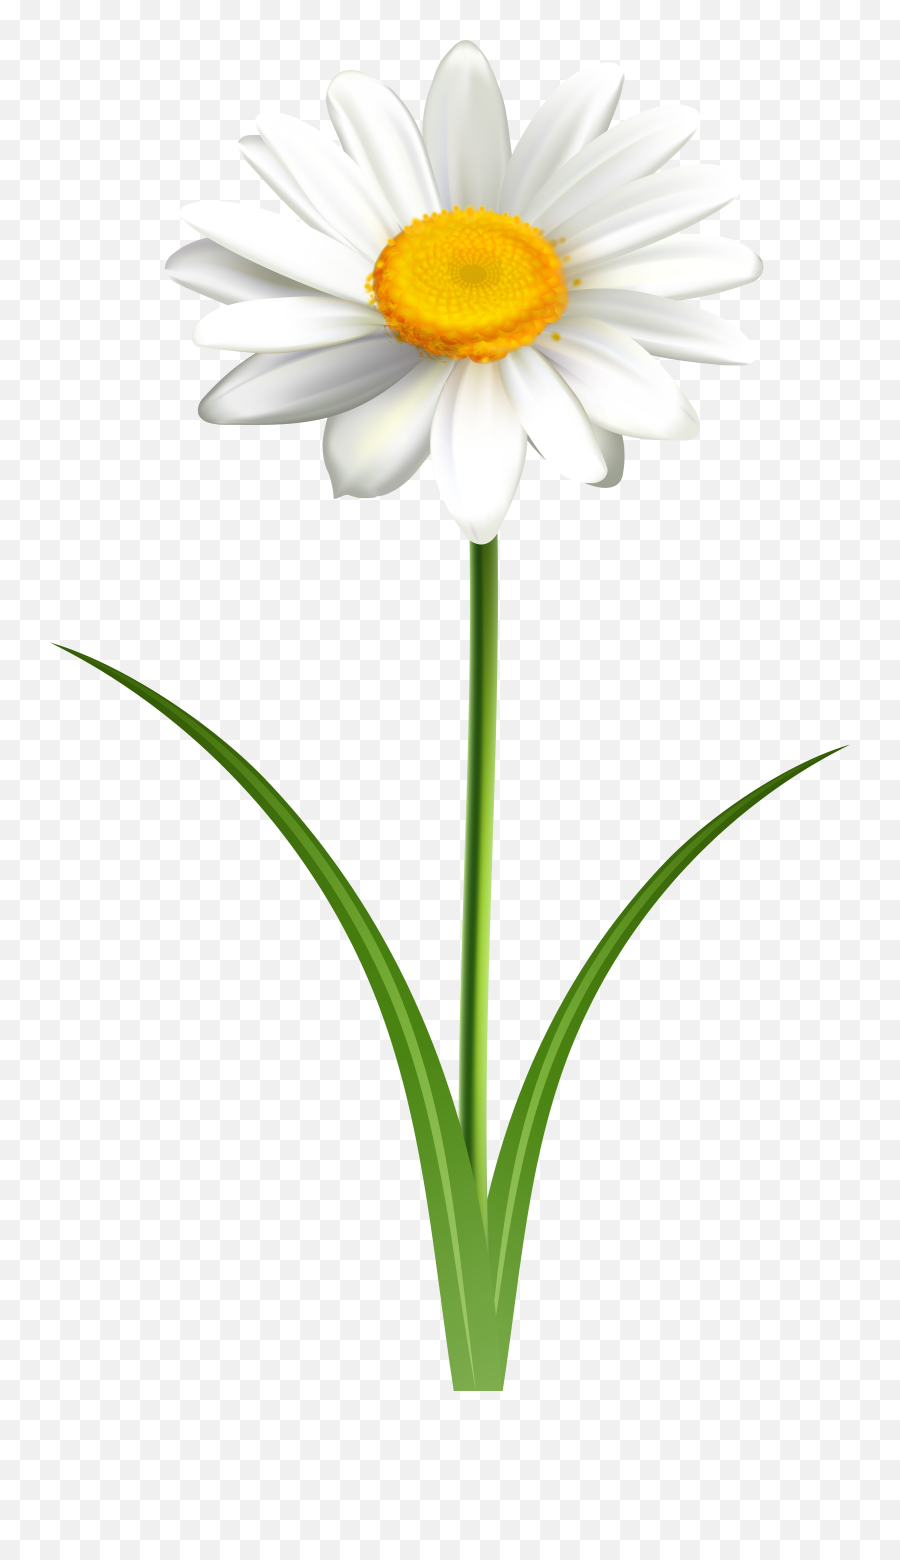 Daisy Vector Png U0026 Free Daisy Vectorpng Transparent Images - Flower Daisies Transparent Background Emoji,Eggplant Emoji Transparent Background